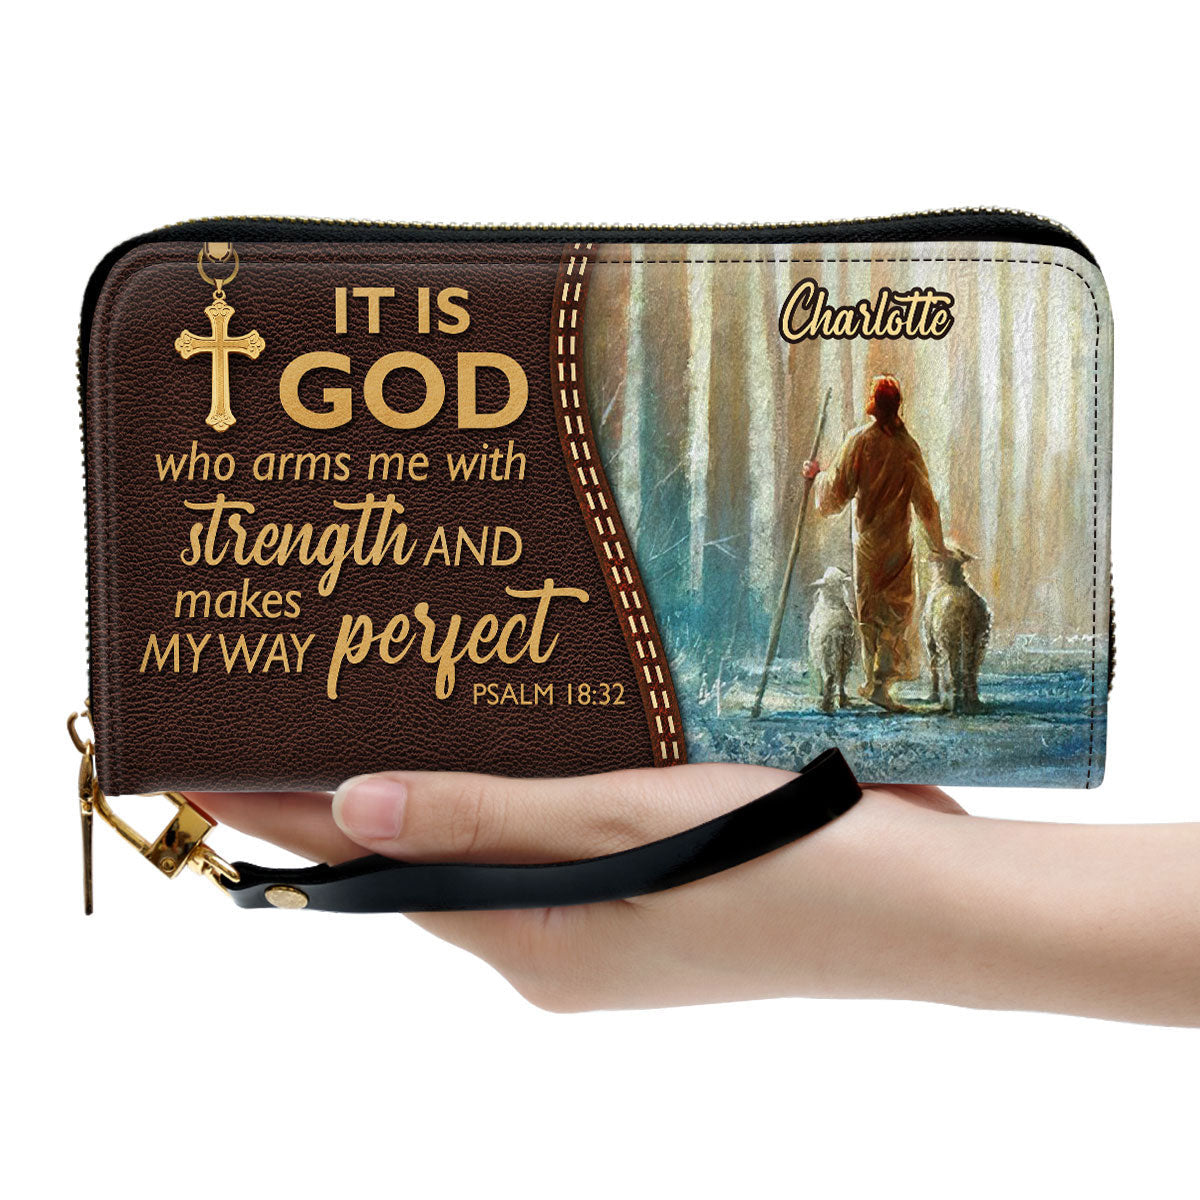 Beautiful Personalized Lamb Clutch Purse - It Is God Who Makes My Way Perfect Clutch Purse - Women Clutch Purse